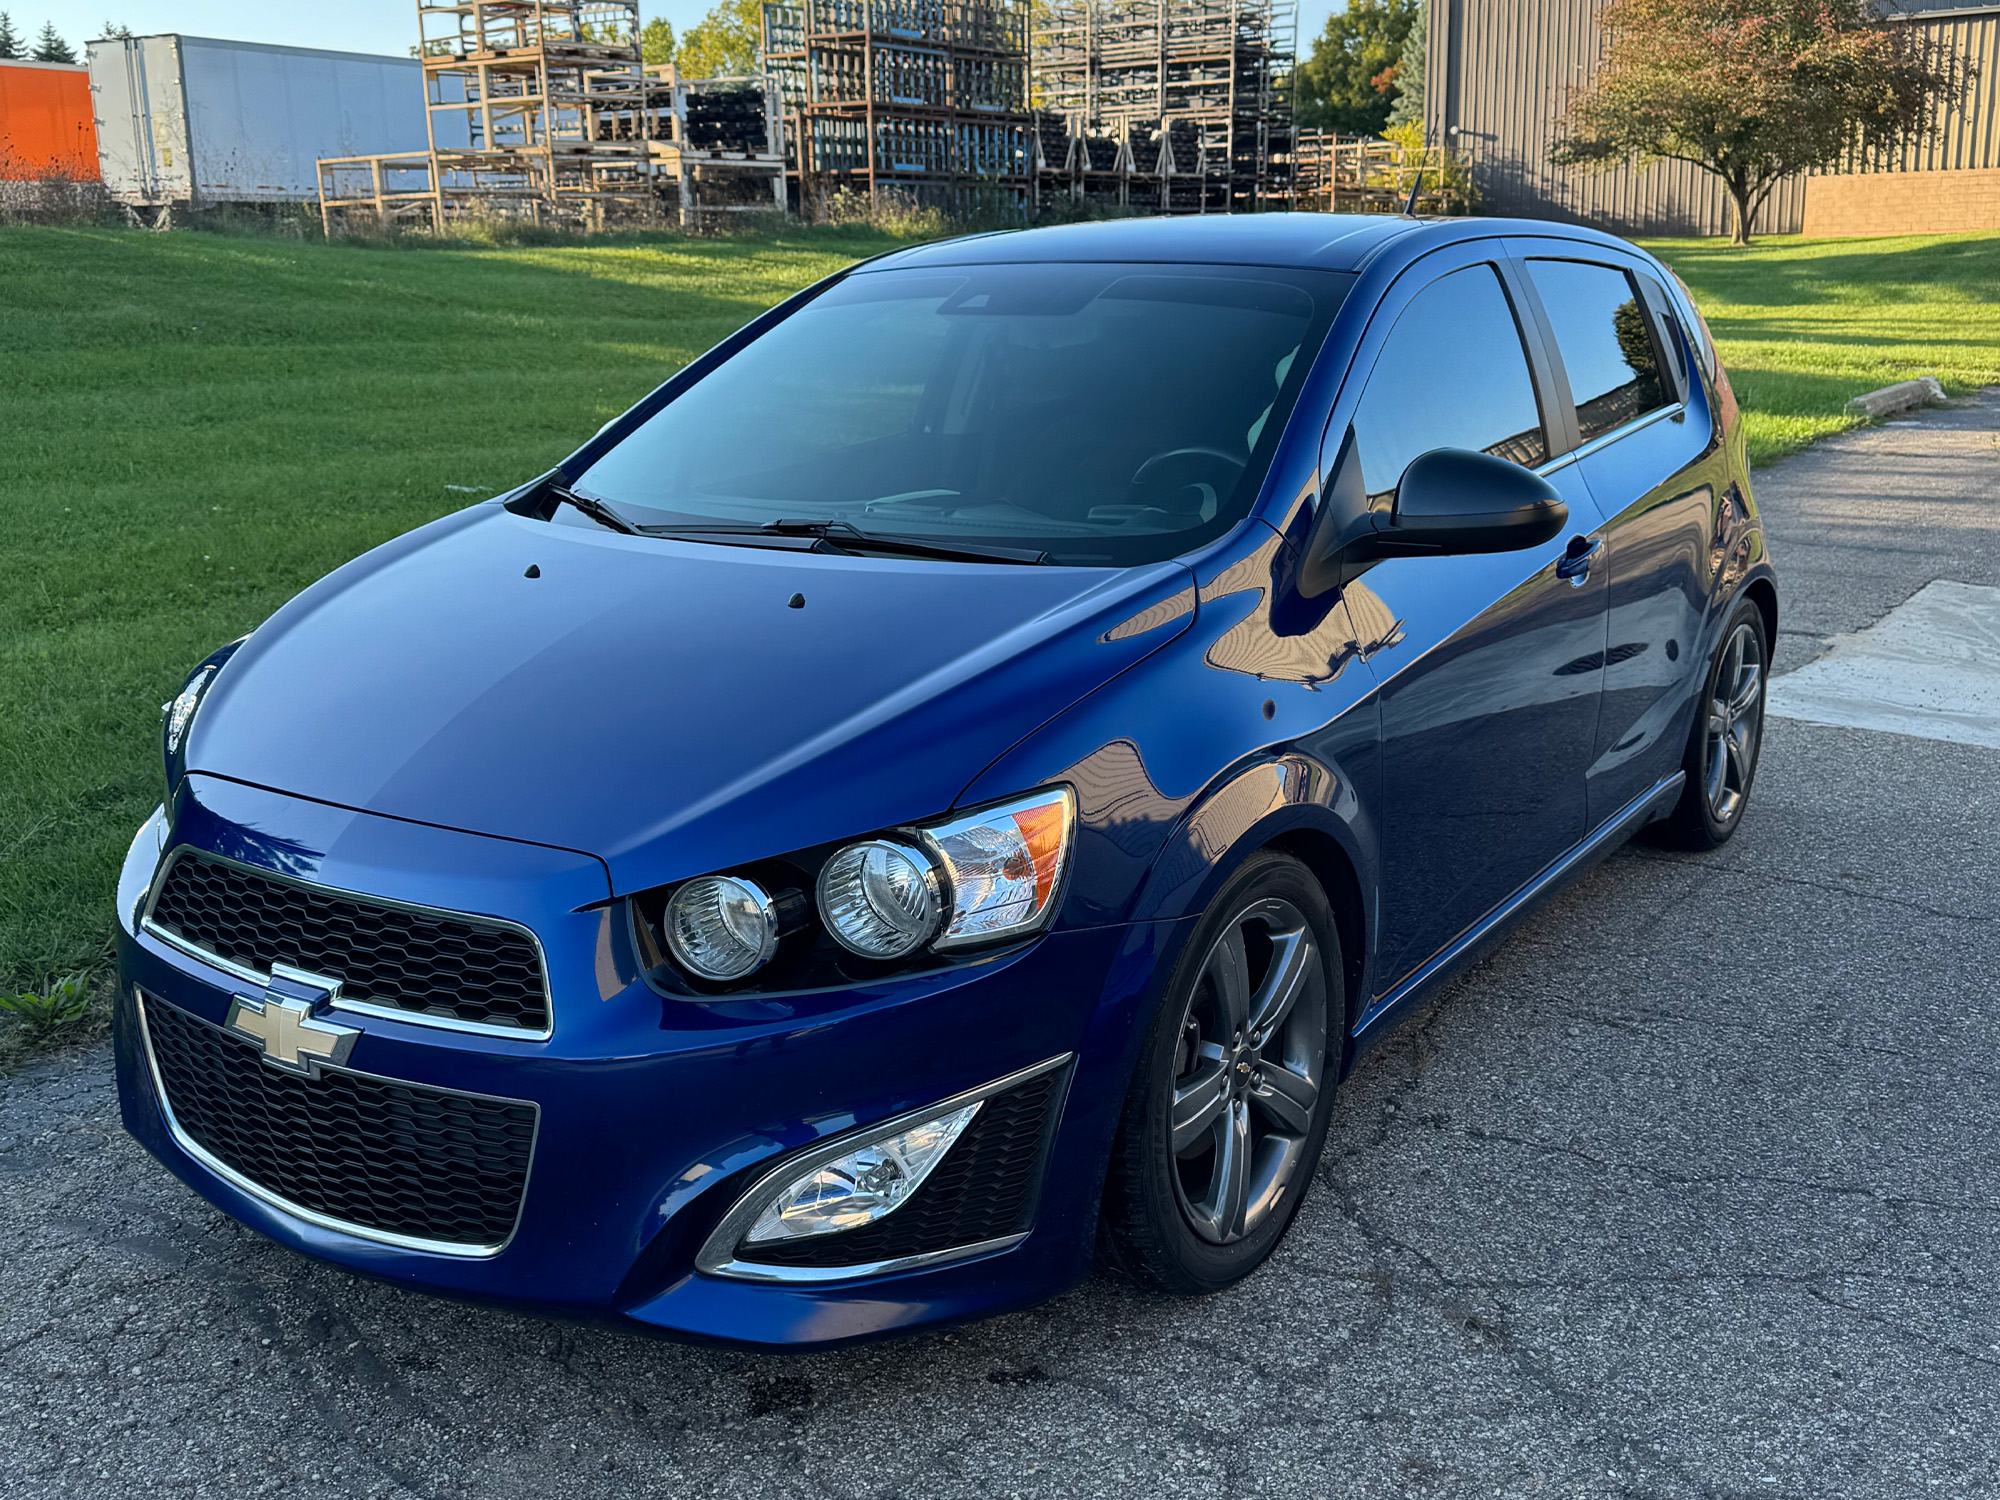 2014 Chevy Sonic RS 6 Speed Manual 2014 chevy sonic rs for sale, chevy sonic rs for sale, chevrolet sonic rs for sale, manual chevy sonic for sale, 6 speed chevy sonic rs for sale